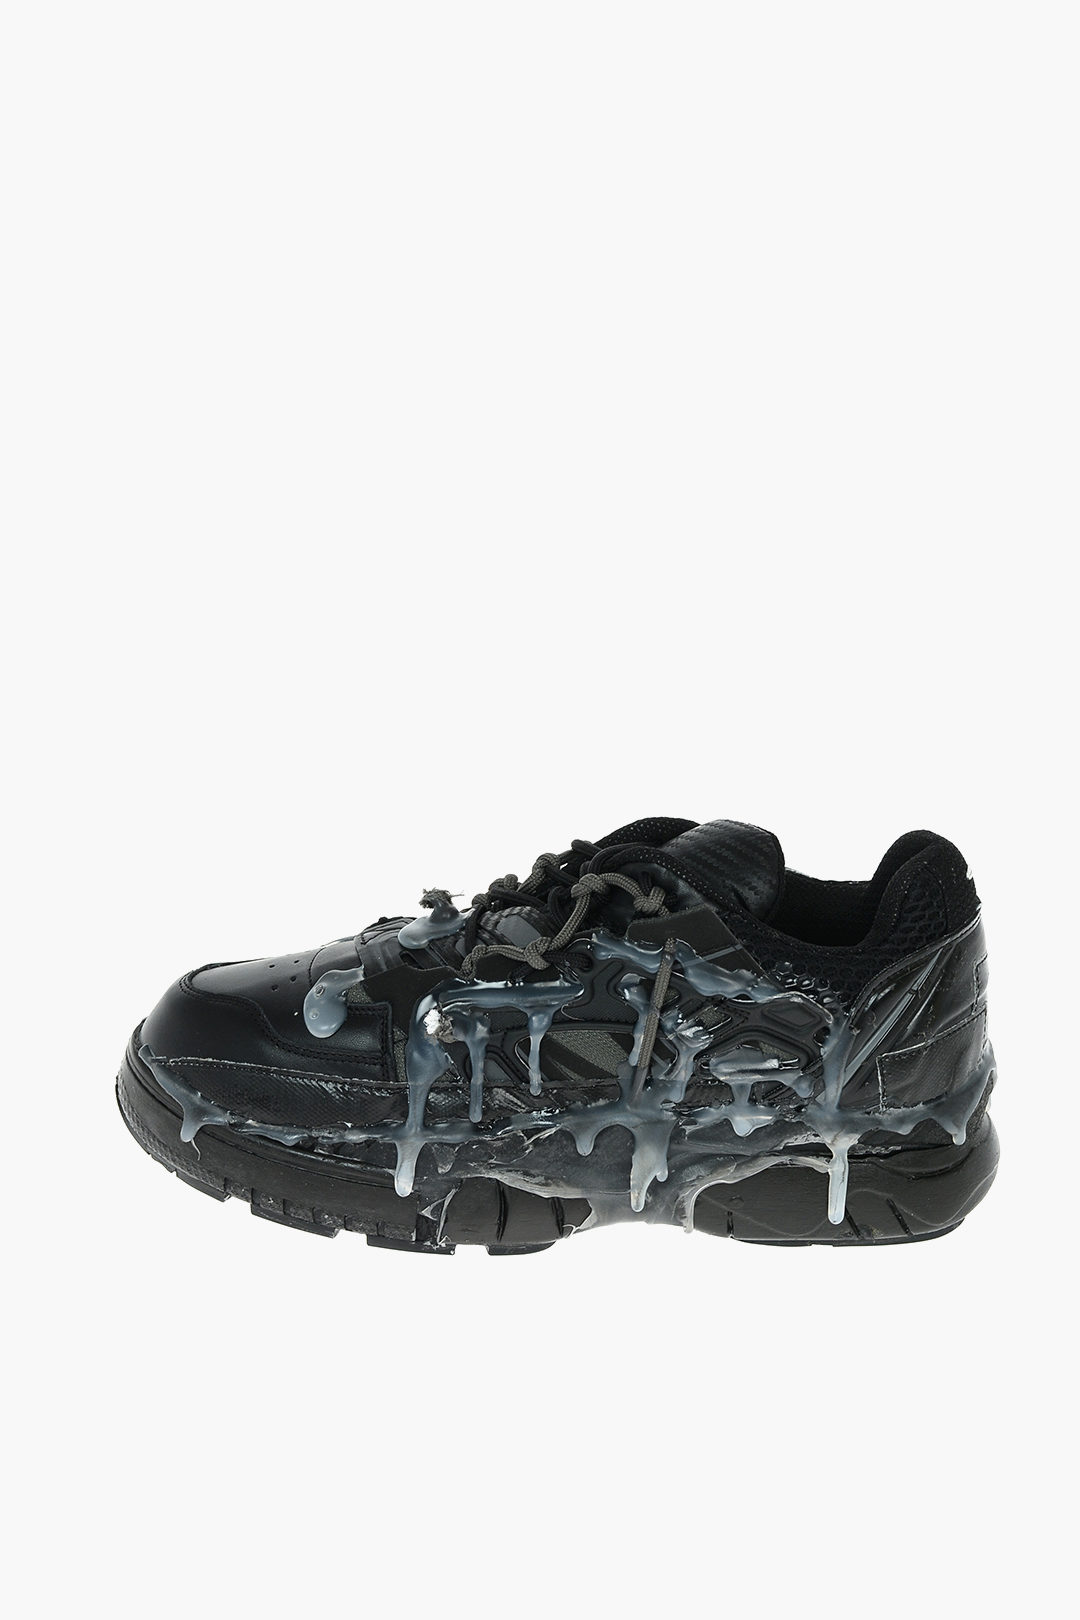 Maison Margiela MM22 Leather FUSION Low Sneakers men - Glamood Outlet